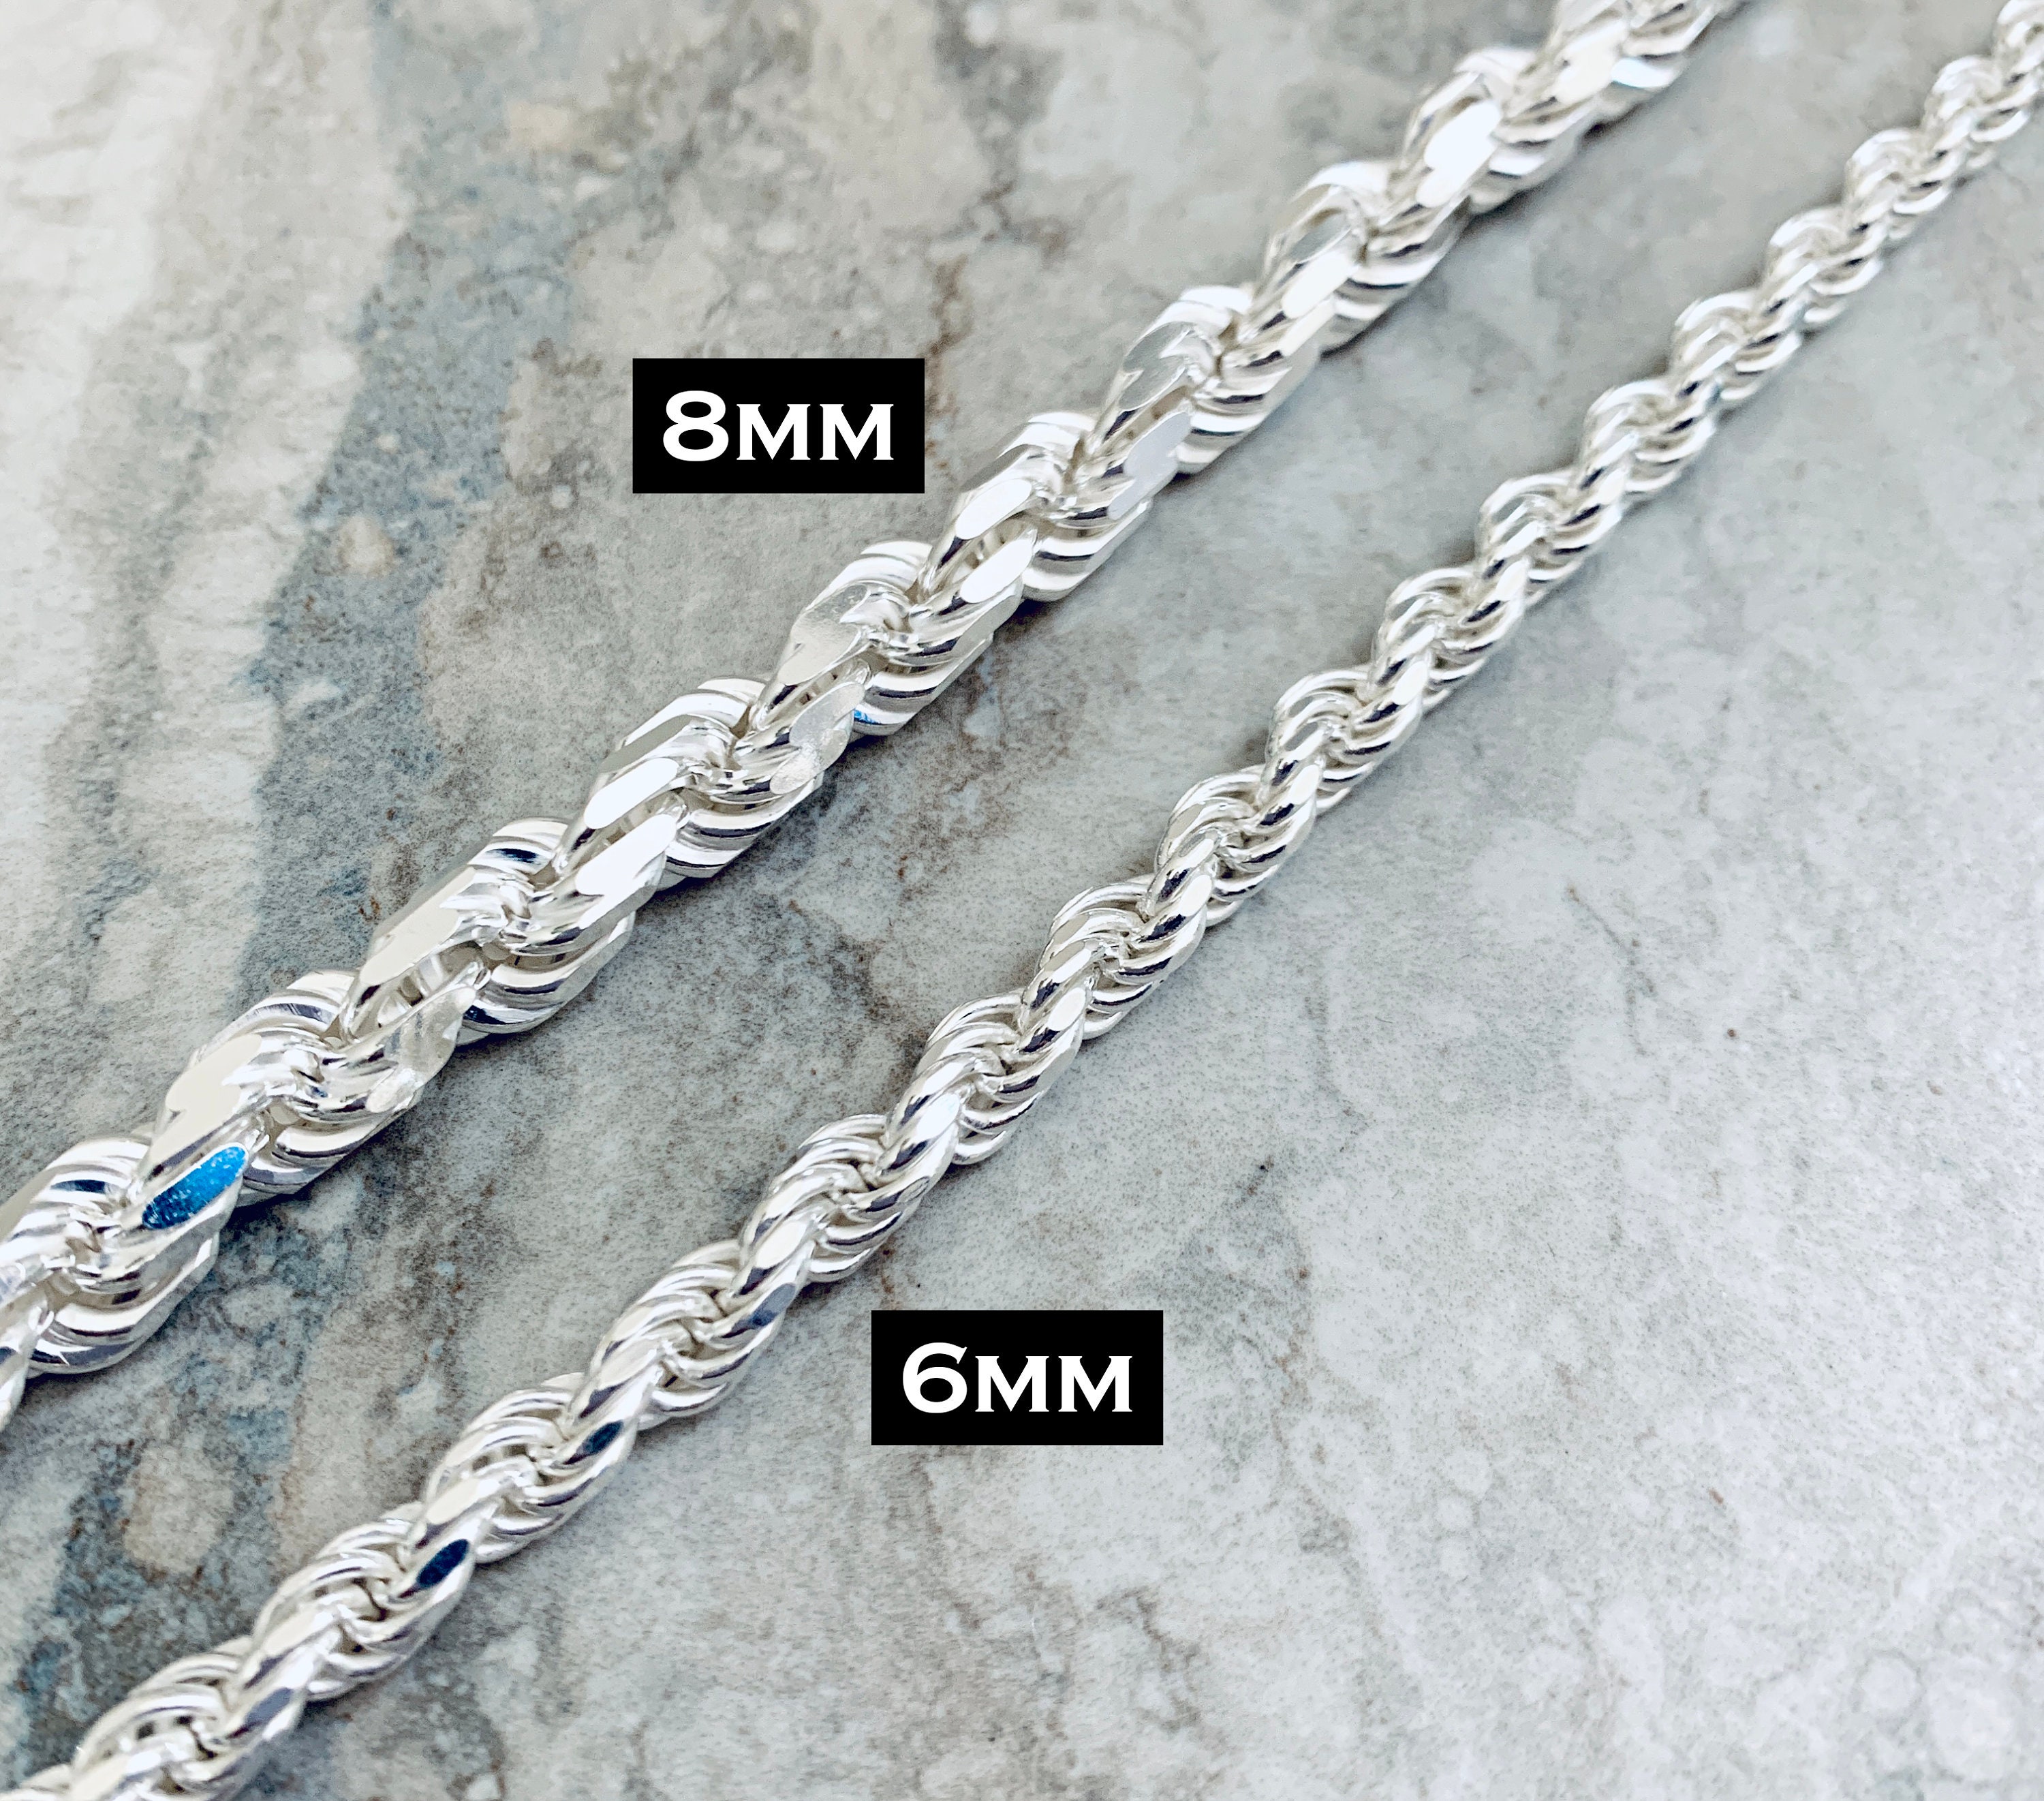 8mm 925 Mariner Sterling Silver Solid Chain Necklace Diamond Cut High –  Daniel Jeweler